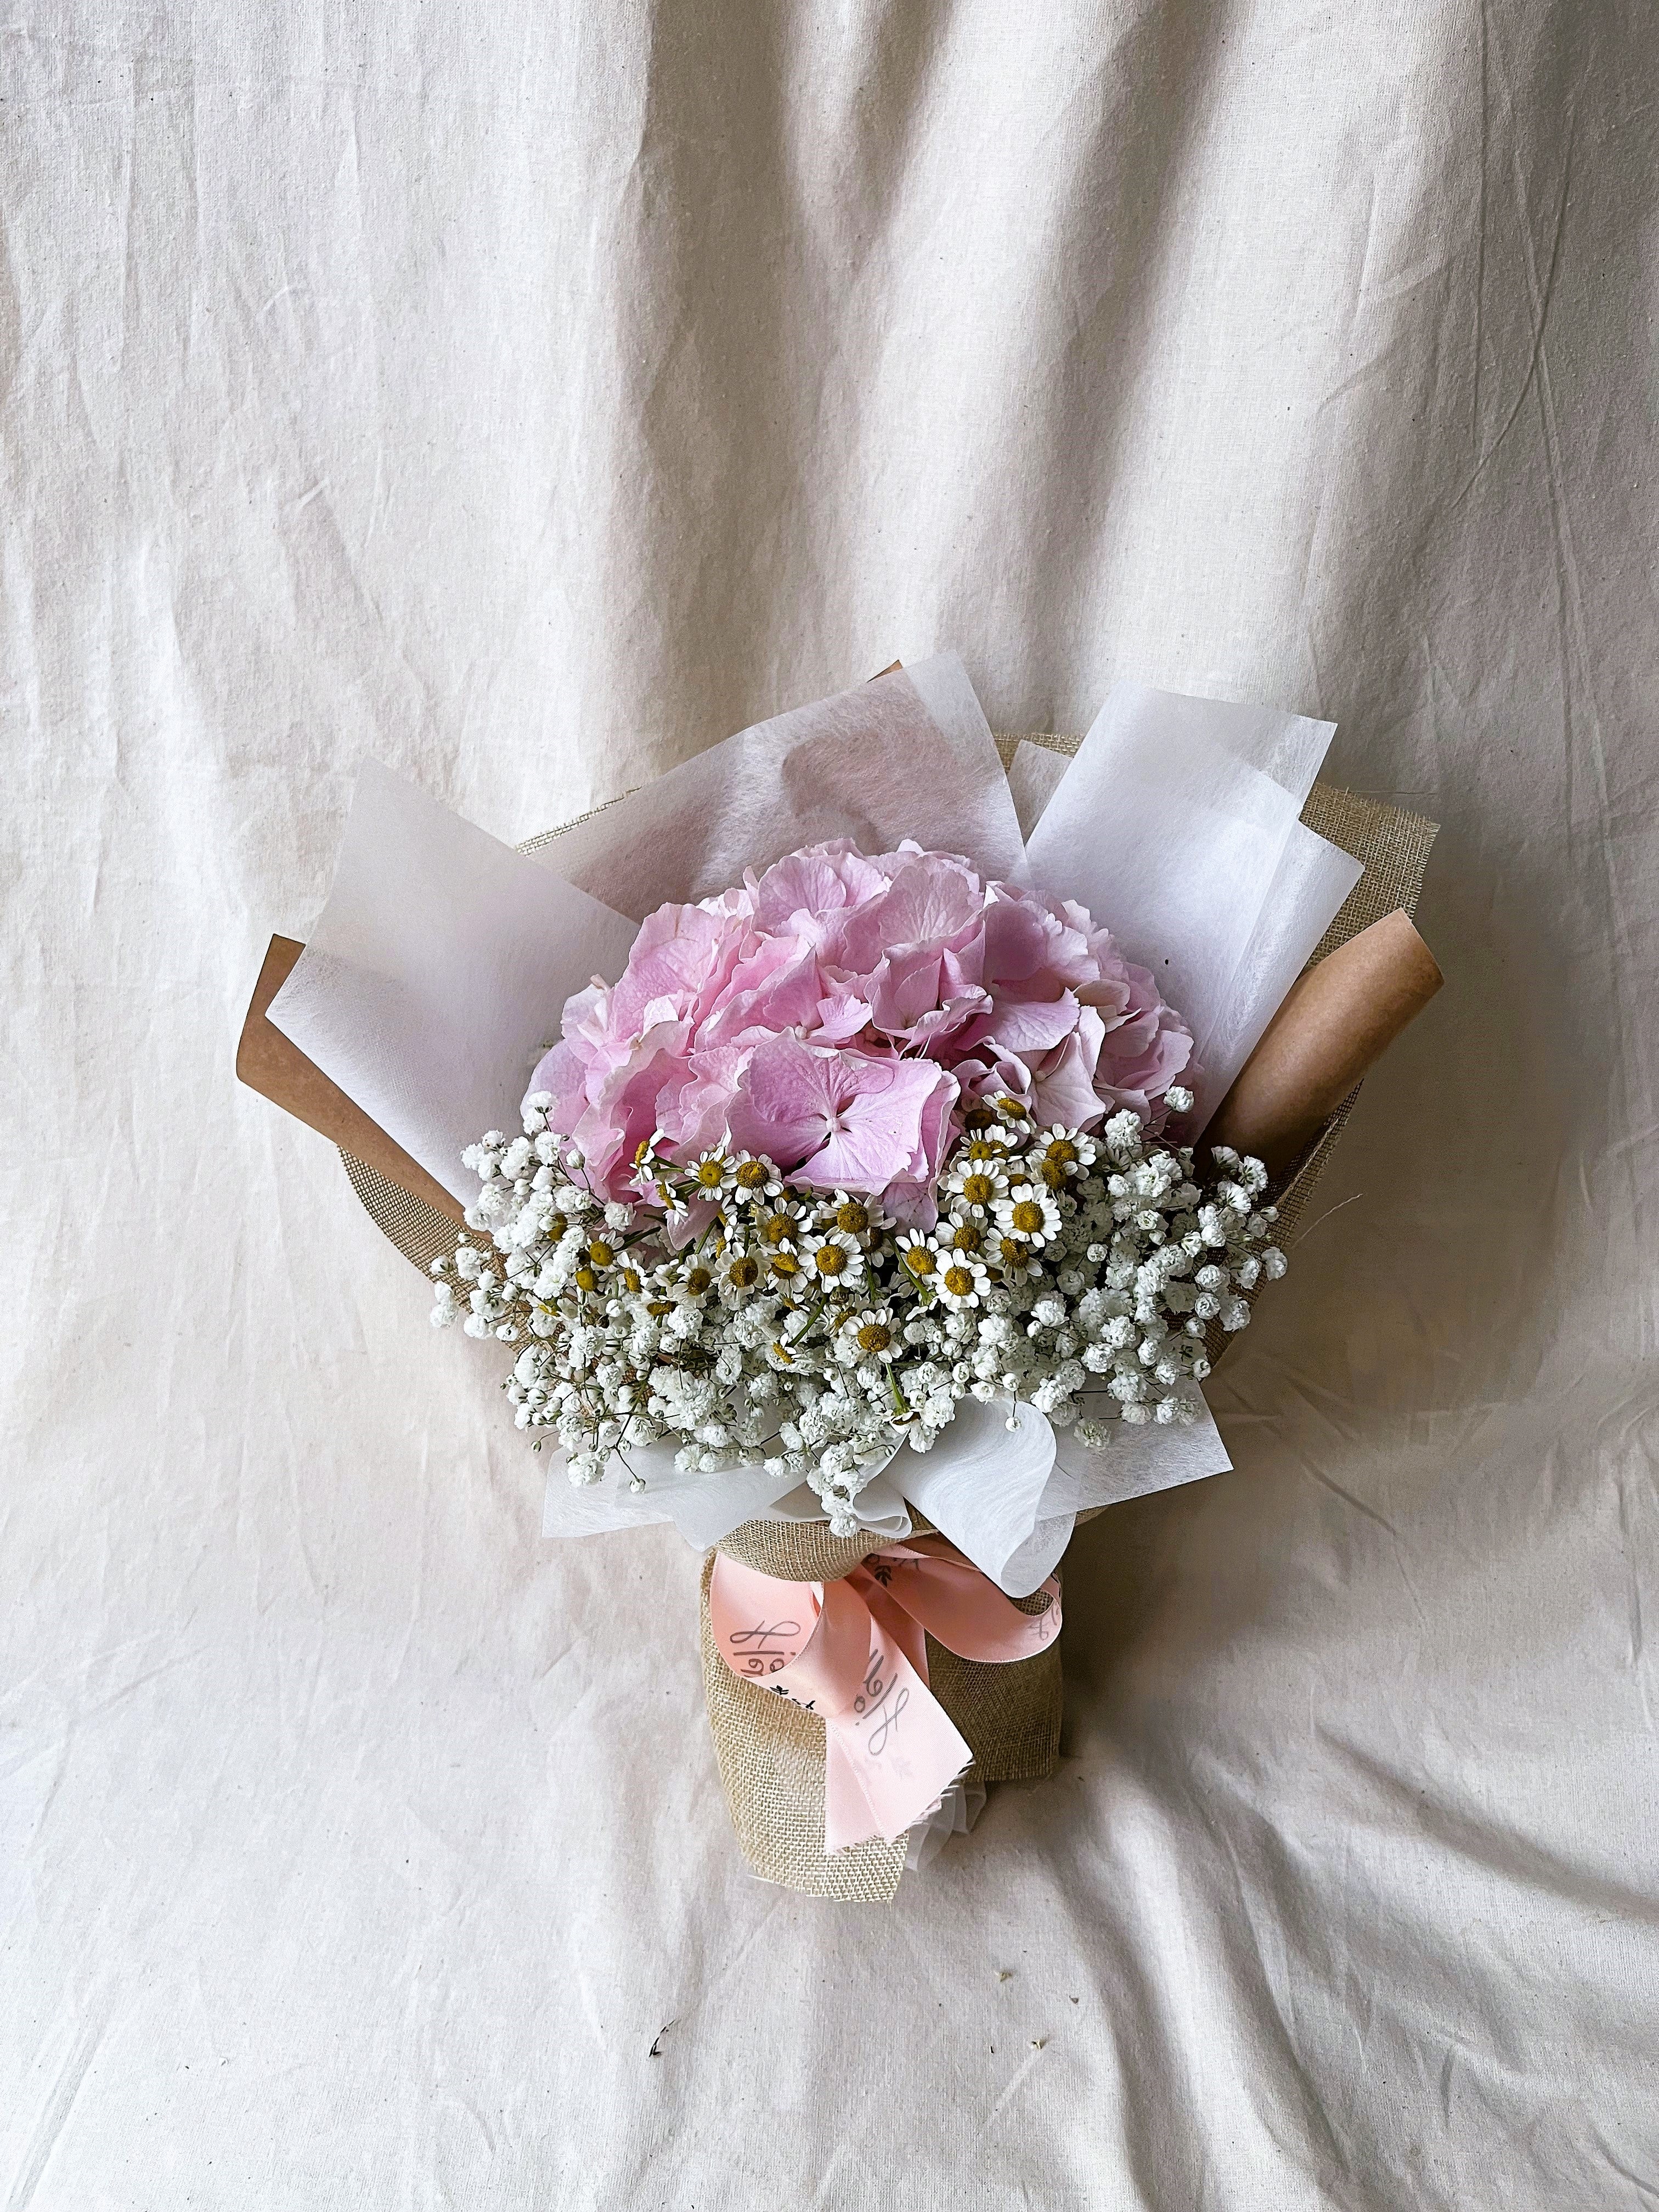 Why Choose a Hydrangea Bouquet for Your Loved One?